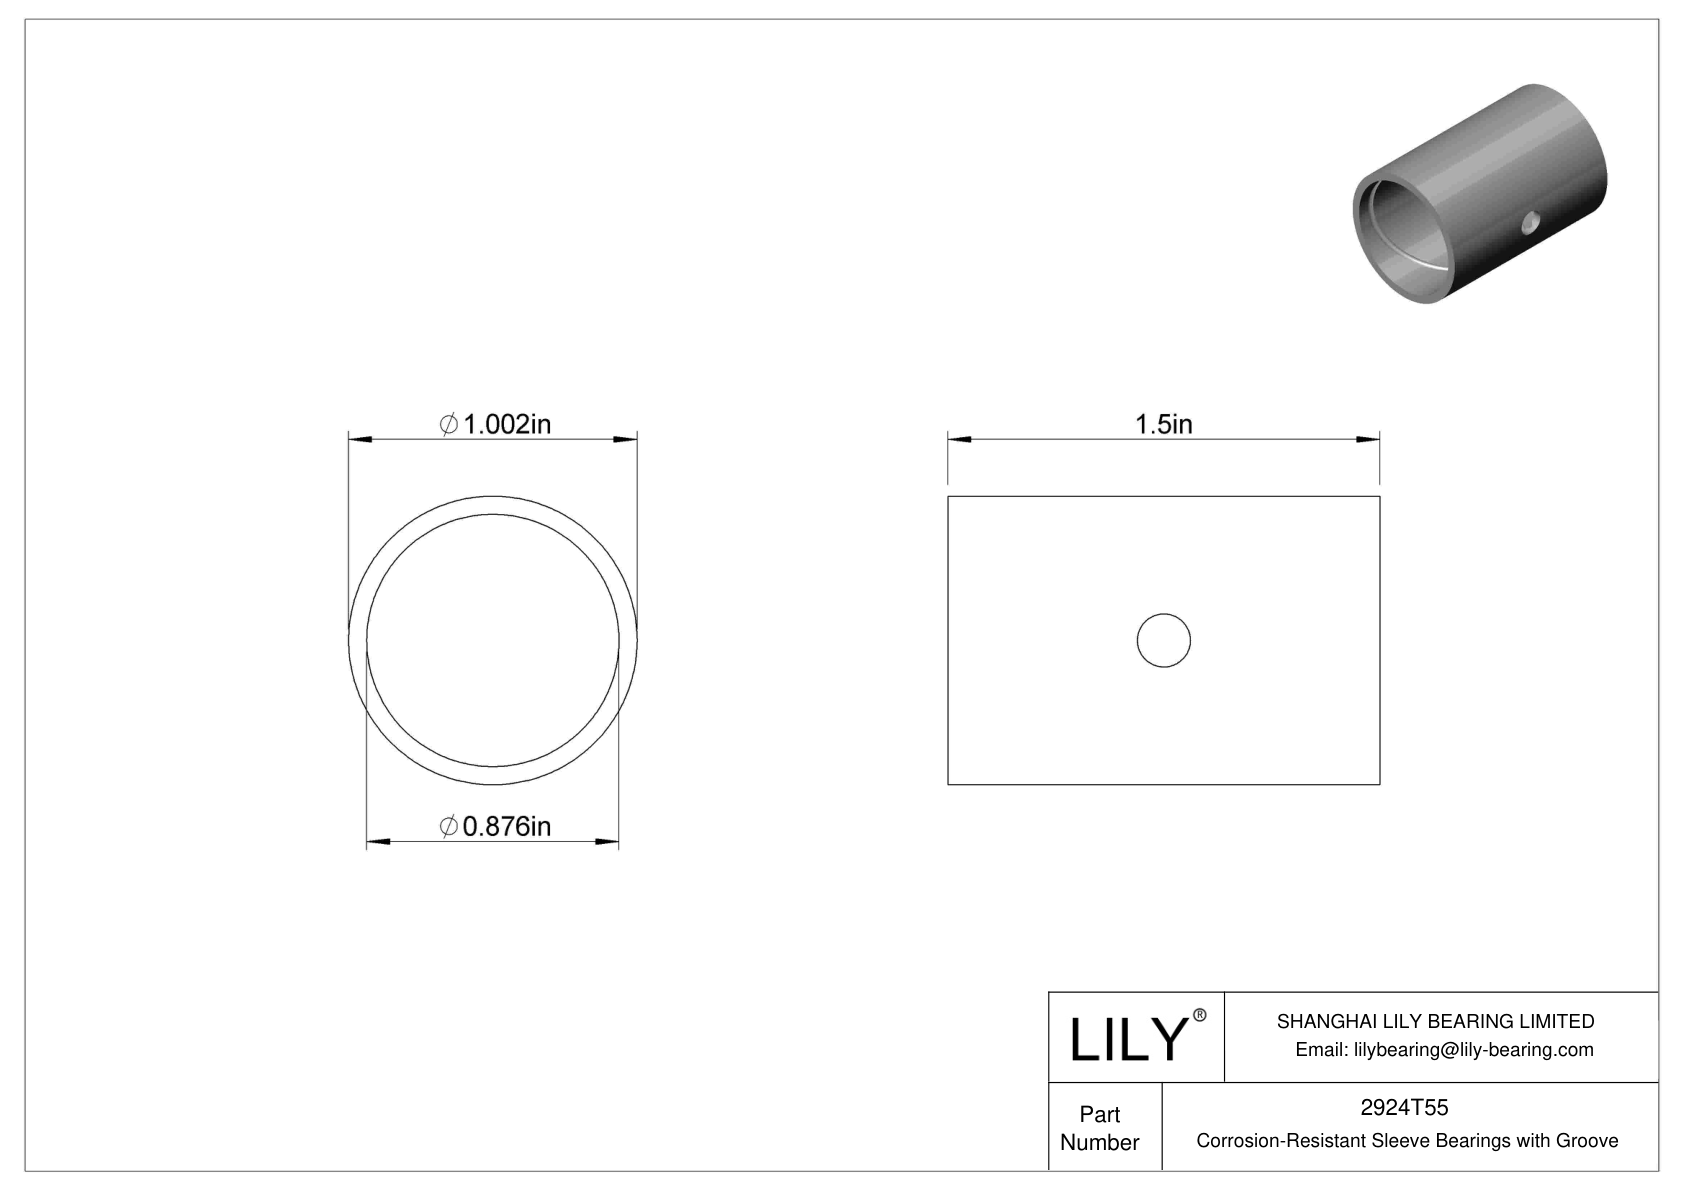 CJCETFF Corrosion-Resistant Sleeve Bearings with Groove cad drawing